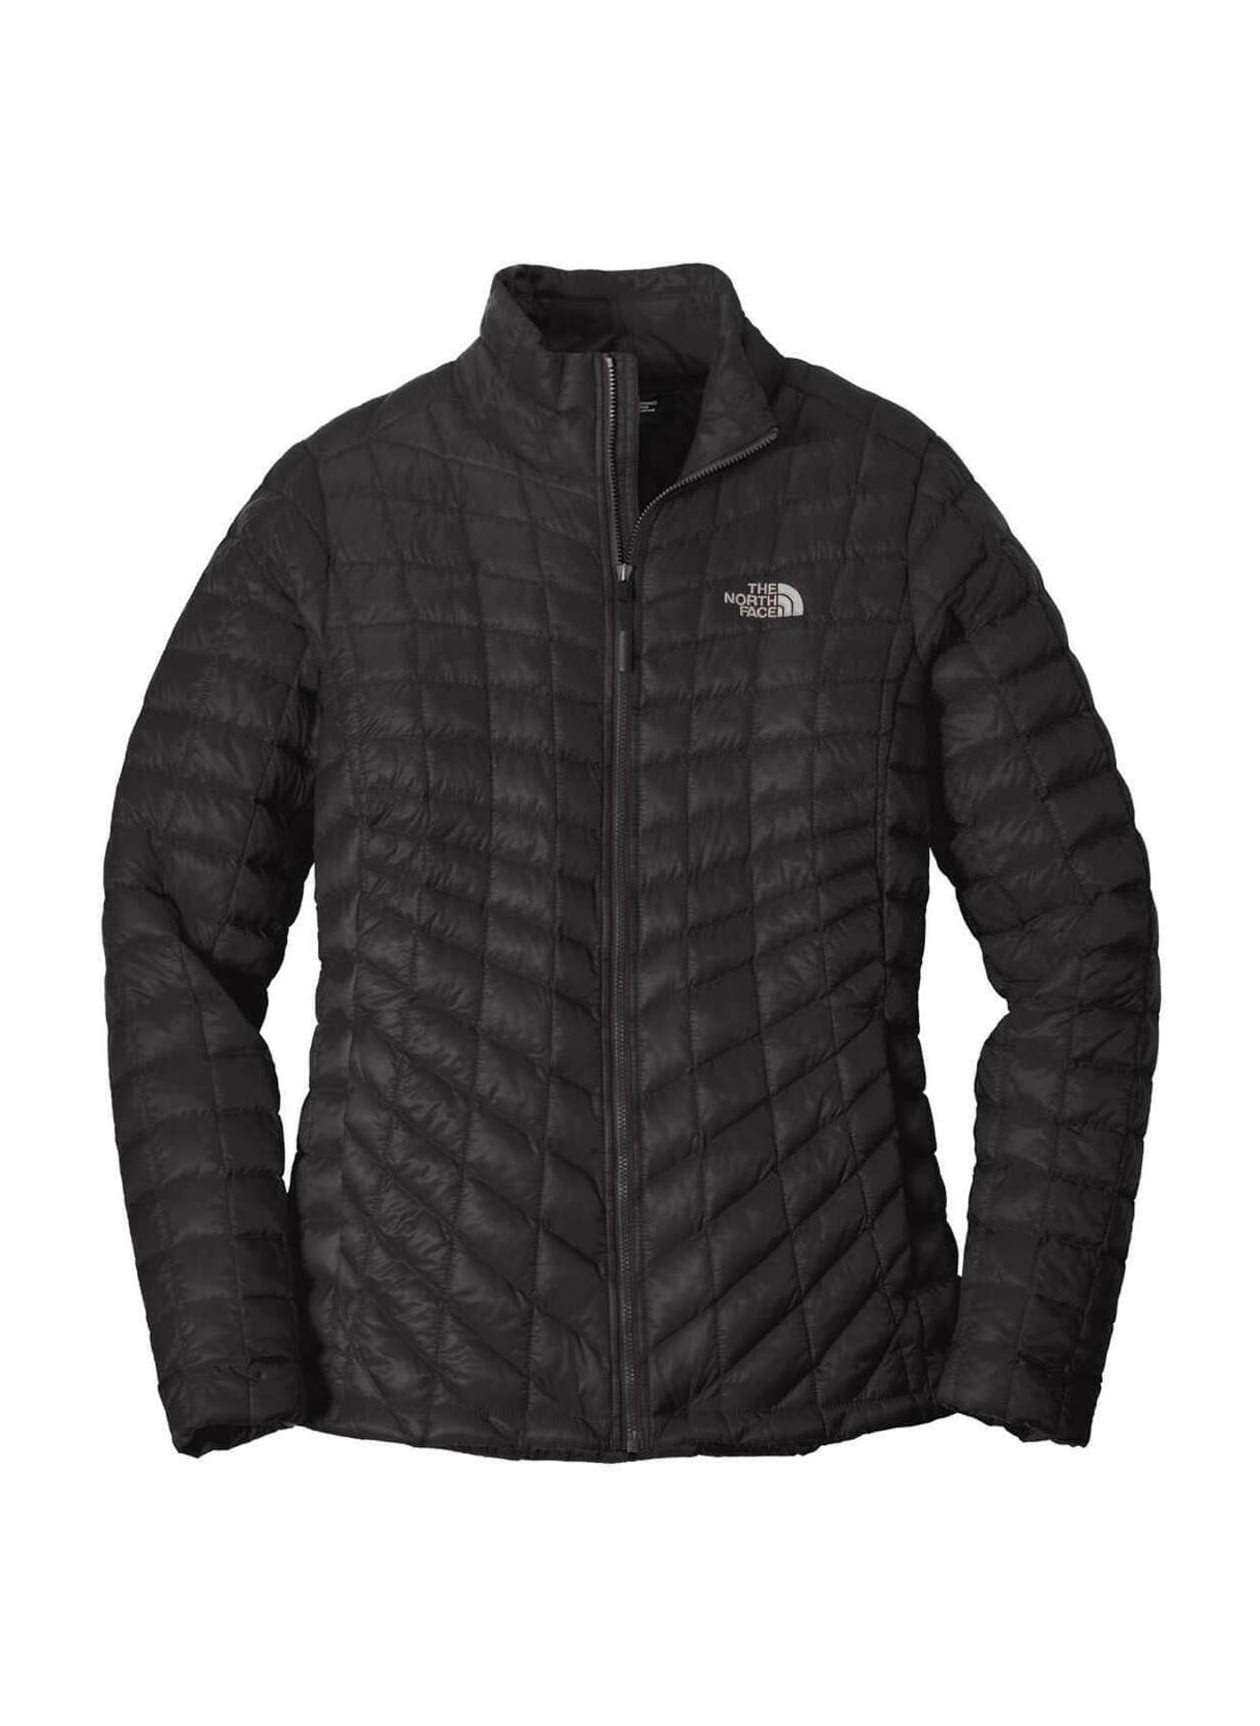 The North Face Women's Matte Black ThermoBall Trekker Jacket